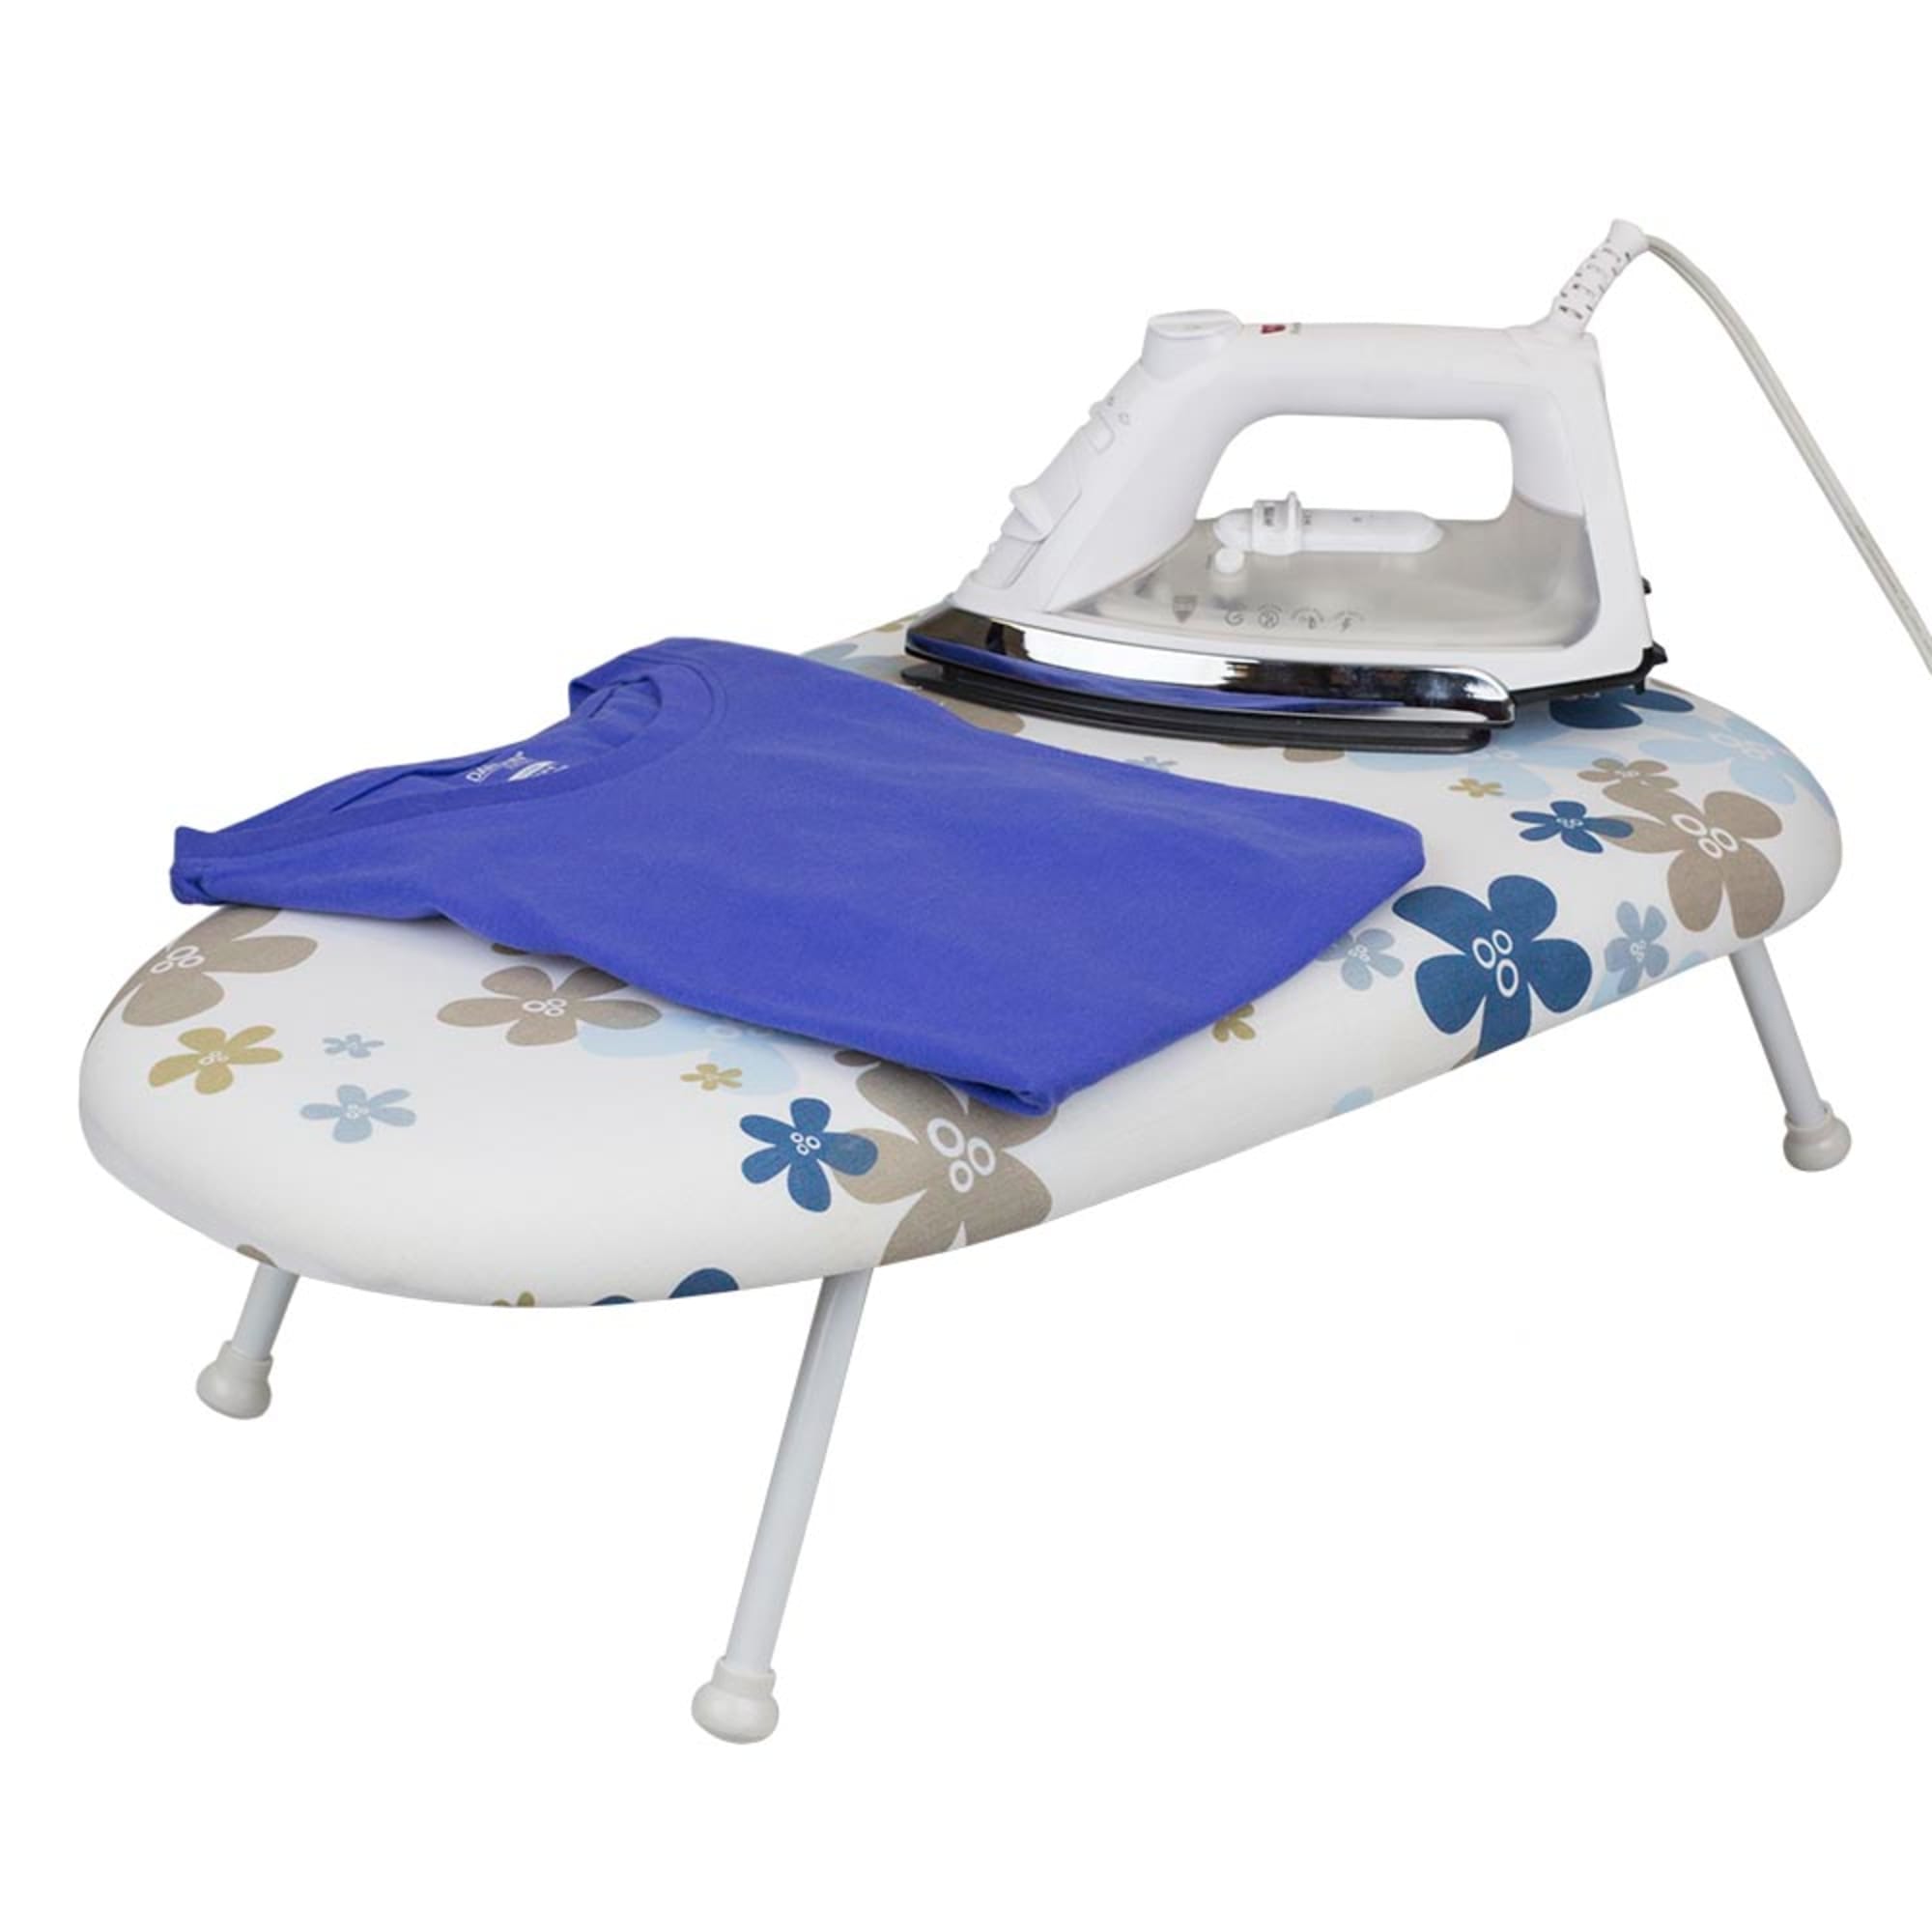 Home Basics Tabletop Ironing Board $12.00 EACH, CASE PACK OF 6